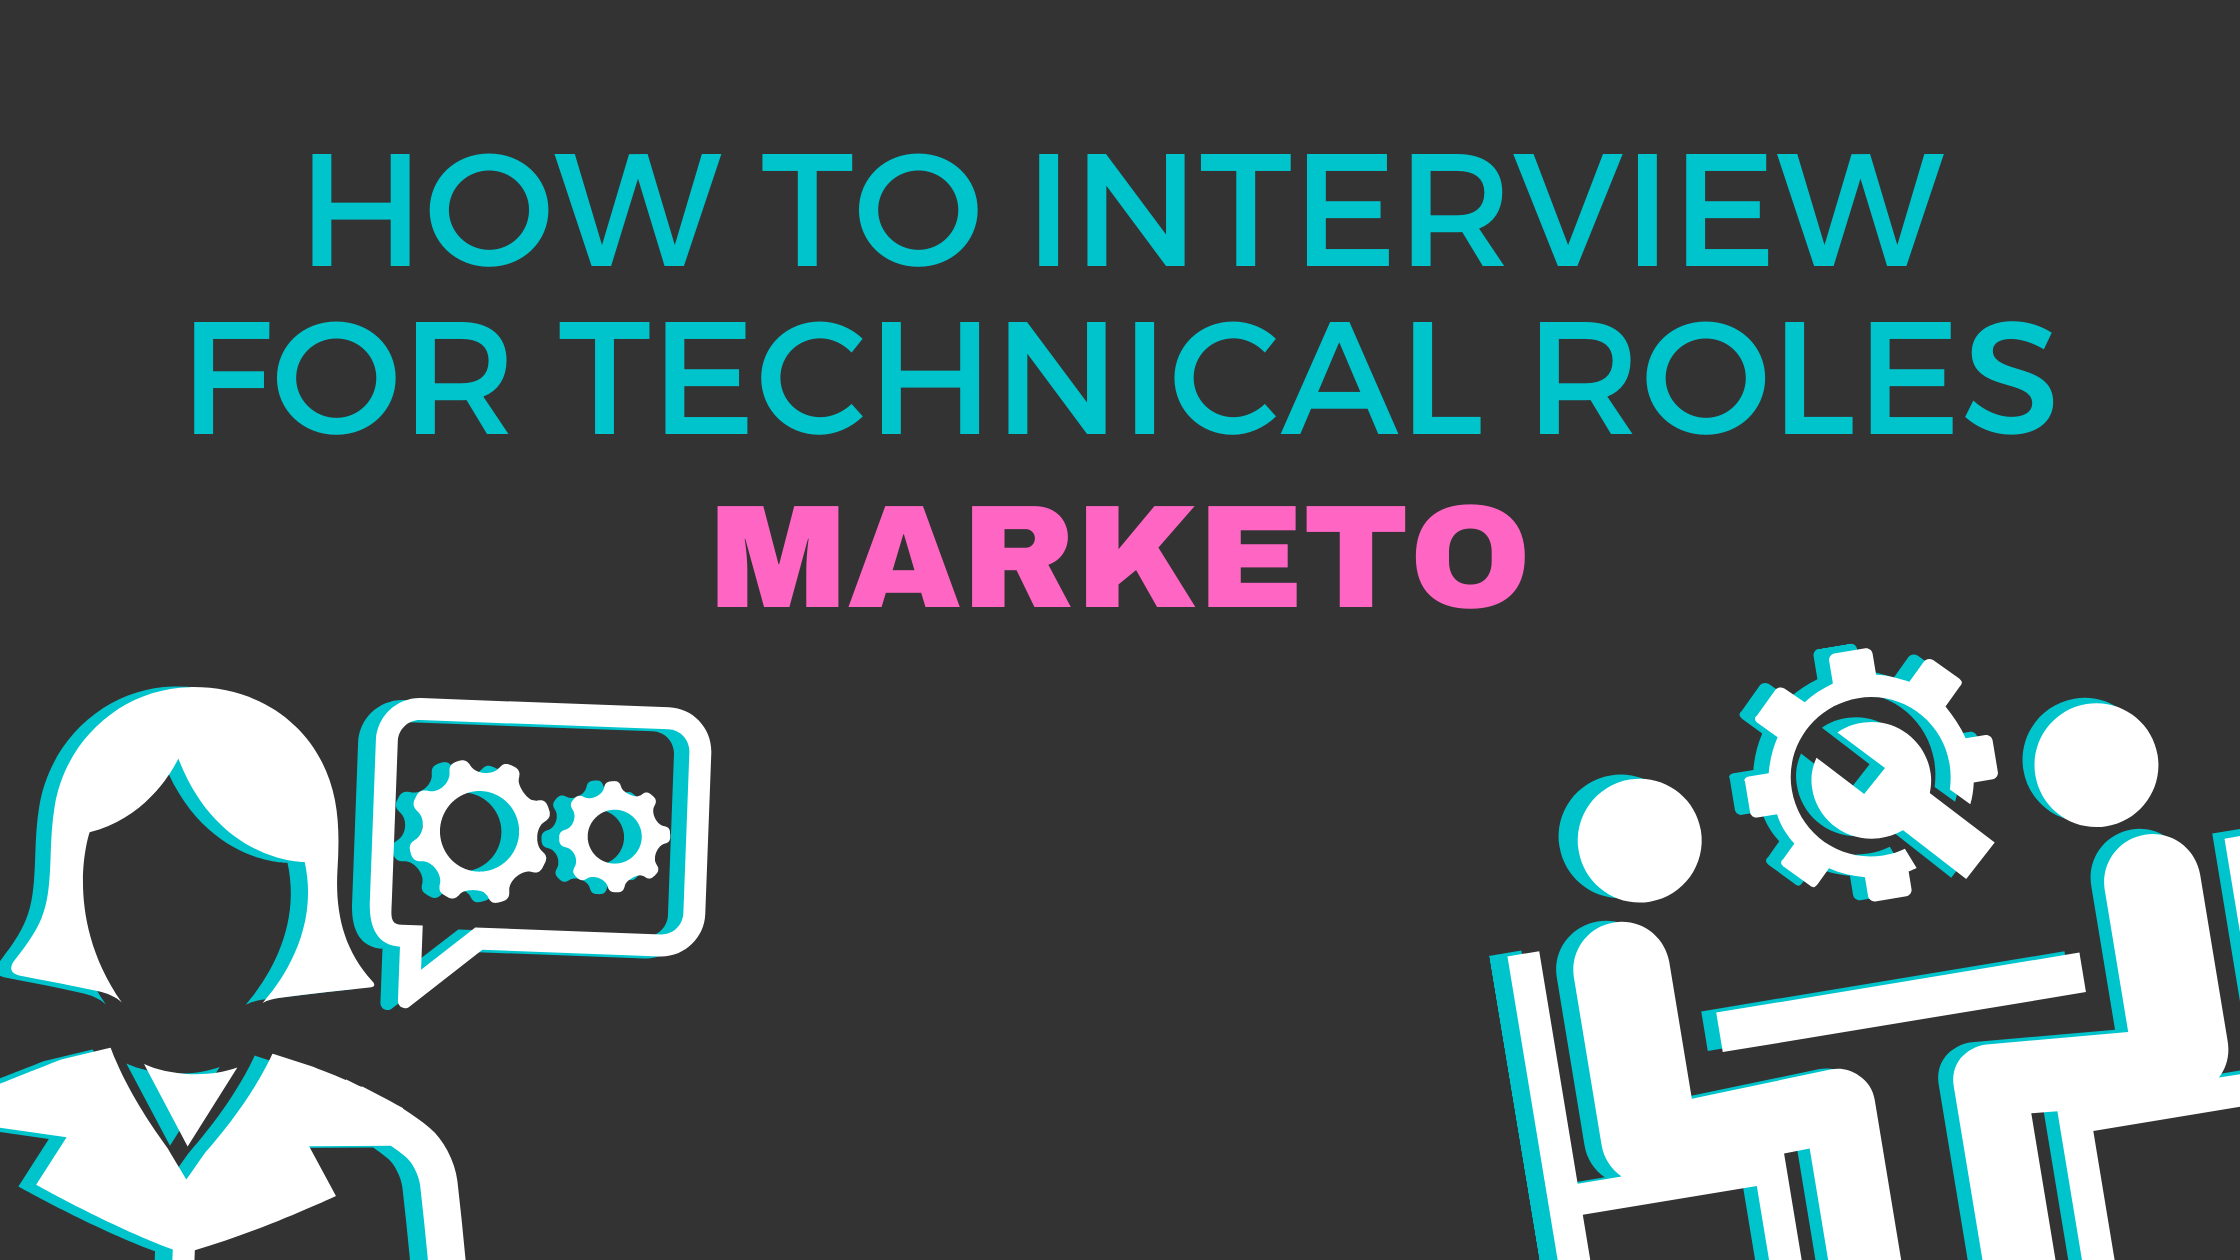 How to interview for technical roles